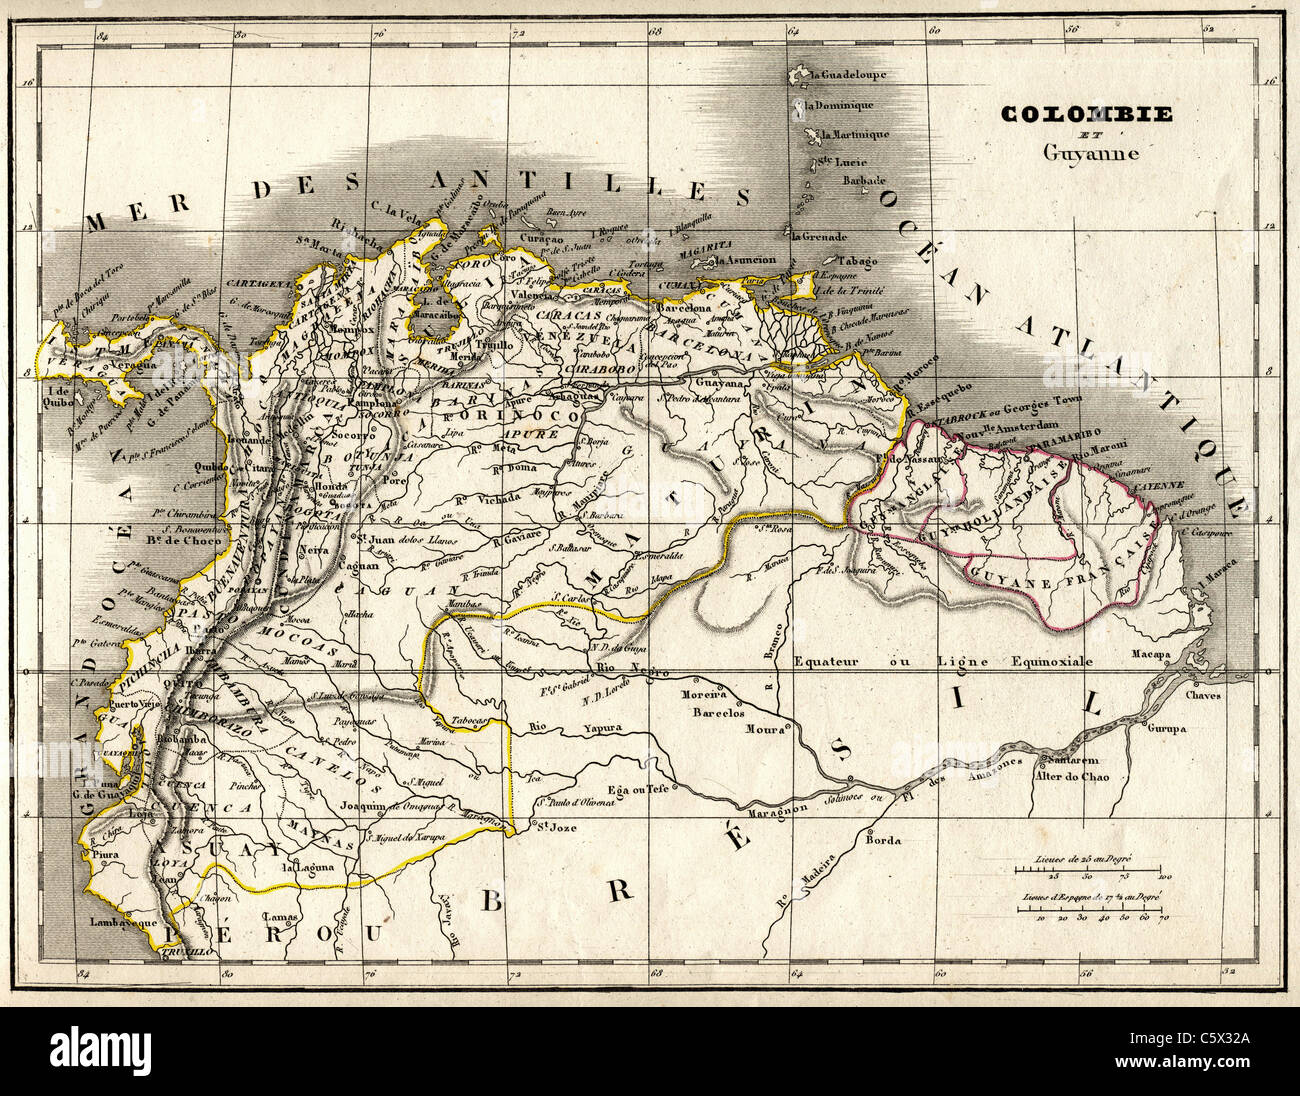 Colombie et Guyanne (Colombia and Guyana) Antiquarian Map from "Atlas Universel de Geographie Ancienne and Moderne" by cartographer C. V. Monin Stock Photo